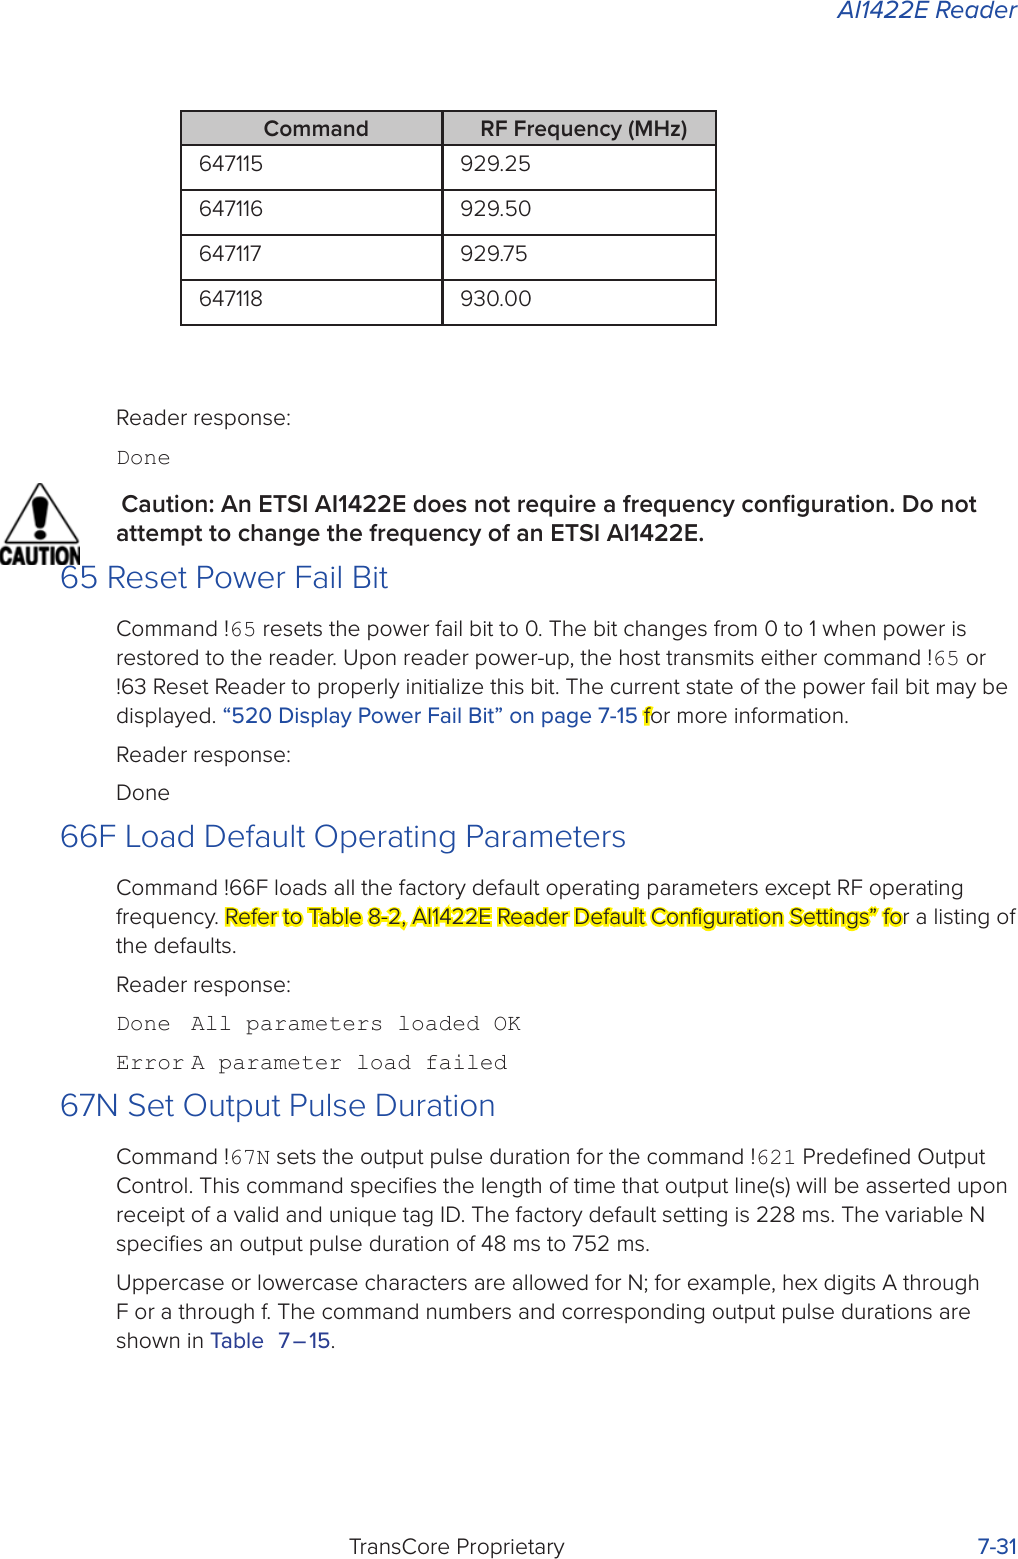 AI1422E ReaderTransCore Proprietary 7-31Reader response:DoneCaution: An ETSI AI1422E does not require a frequency conﬁguration. Do not attempt to change the frequency of an ETSI AI1422E.65 Reset Power Fail BitCommand !65 resets the power fail bit to 0. The bit changes from 0 to 1 when power is restored to the reader. Upon reader power-up, the host transmits either command !65 or !63 Reset Reader to properly initialize this bit. The current state of the power fail bit may be displayed. “520 Display Power Fail Bit” on page 7-15 for more information.Reader response:Done66F Load Default Operating ParametersCommand !66F loads all the factory default operating parameters except RF operating frequency. Refer to Table 8-2, AI1422E Reader Default Conﬁguration Settings” for a listing of the defaults.Reader response:Done  All parameters loaded OKError A parameter load failed67N Set Output Pulse DurationCommand !67N sets the output pulse duration for the command !621 Predeﬁned Output Control. This command speciﬁes the length of time that output line(s) will be asserted upon receipt of a valid and unique tag ID. The factory default setting is 228 ms. The variable N speciﬁes an output pulse duration of 48 ms to 752 ms.Uppercase or lowercase characters are allowed for N; for example, hex digits A through F or a through f. The command numbers and corresponding output pulse durations are shown in Table 7 – 15.Command RF Frequency (MHz)647115 929.25647116 929.50647117 929.75647118 930.00